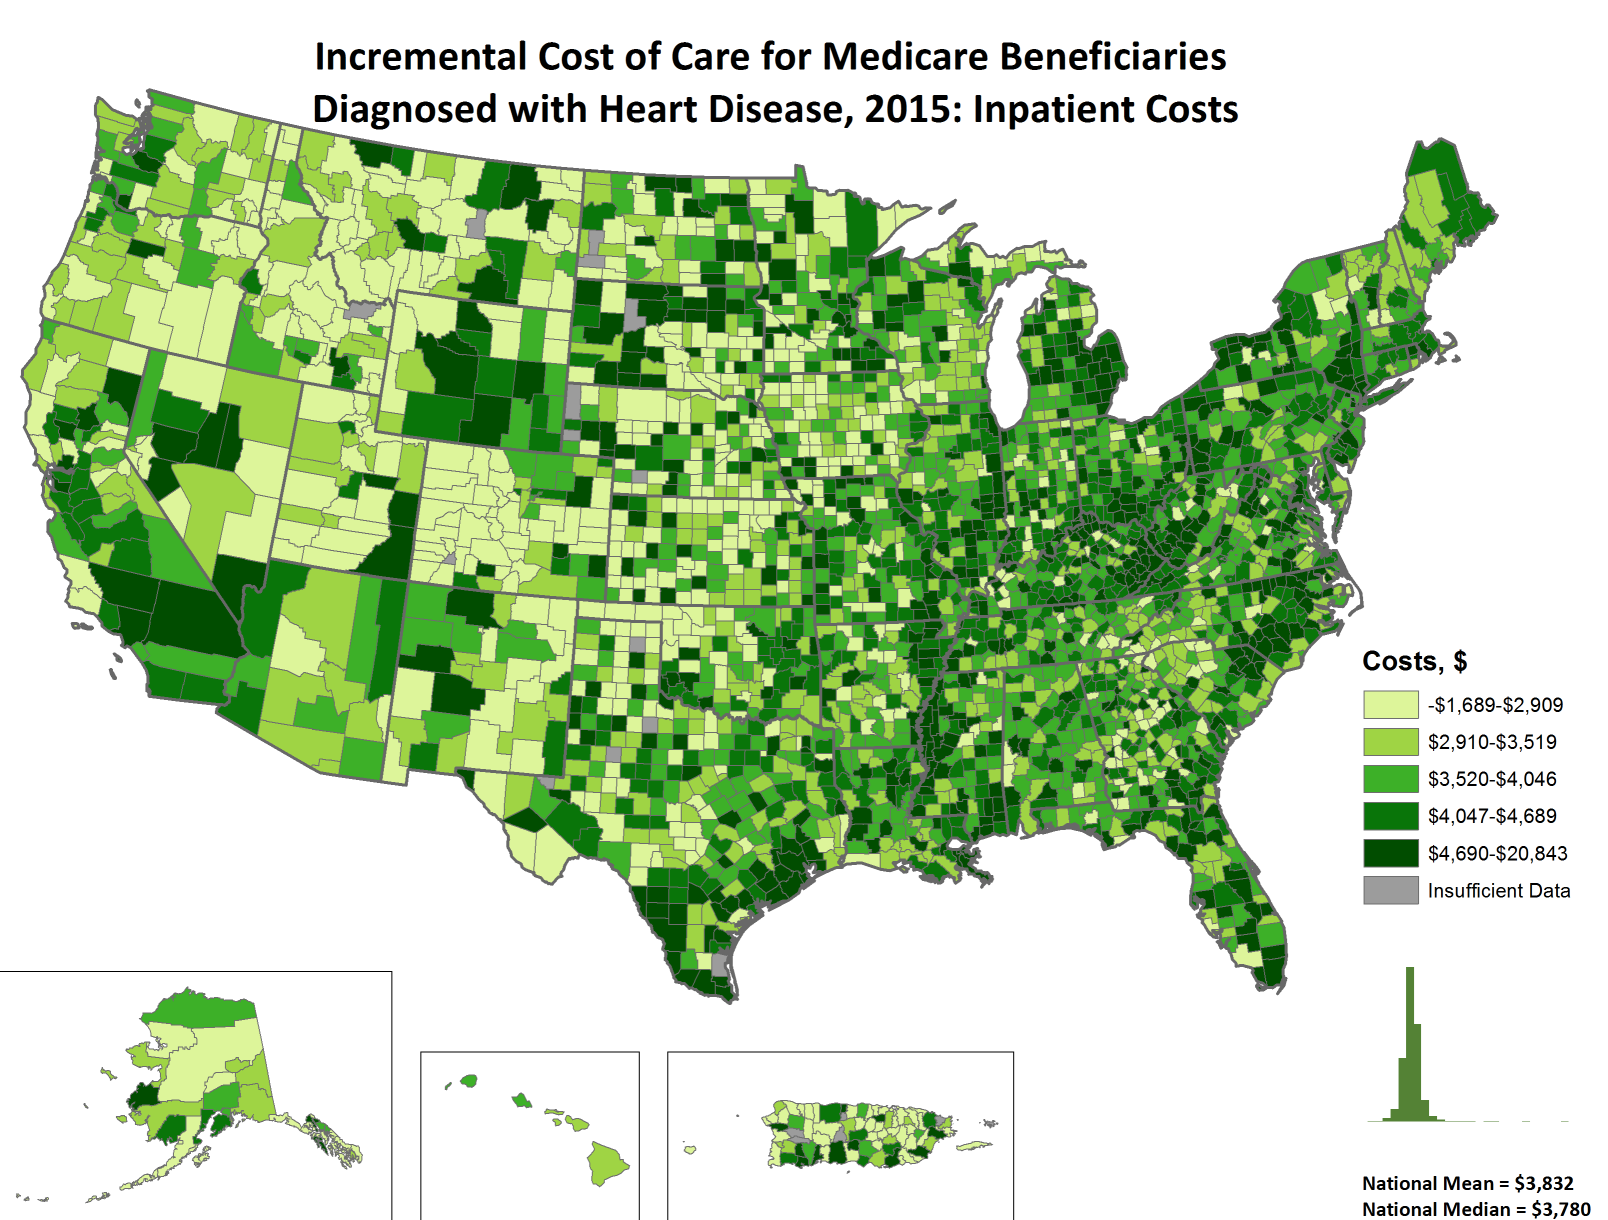 Incremental Costs of Care per Capita for FFS Medicare beneficiaries diagnosed with Heart Disease, 2015: Inpatient Costs, by county. This map shows the concentrations of counties with the highest incremental inpatient costs per capita – meaning the top quintile – are located primarily in southern California, southern Texas, Kentucky, North Carolina, Michigan, Wyoming, and South Dakota, with pickets of counties in New York, Pennsylvania, Ohio, Illinois, Mississippi, Arkansas, West Virginia, Virginia, Montana, North Dakota, and Minnesota. 